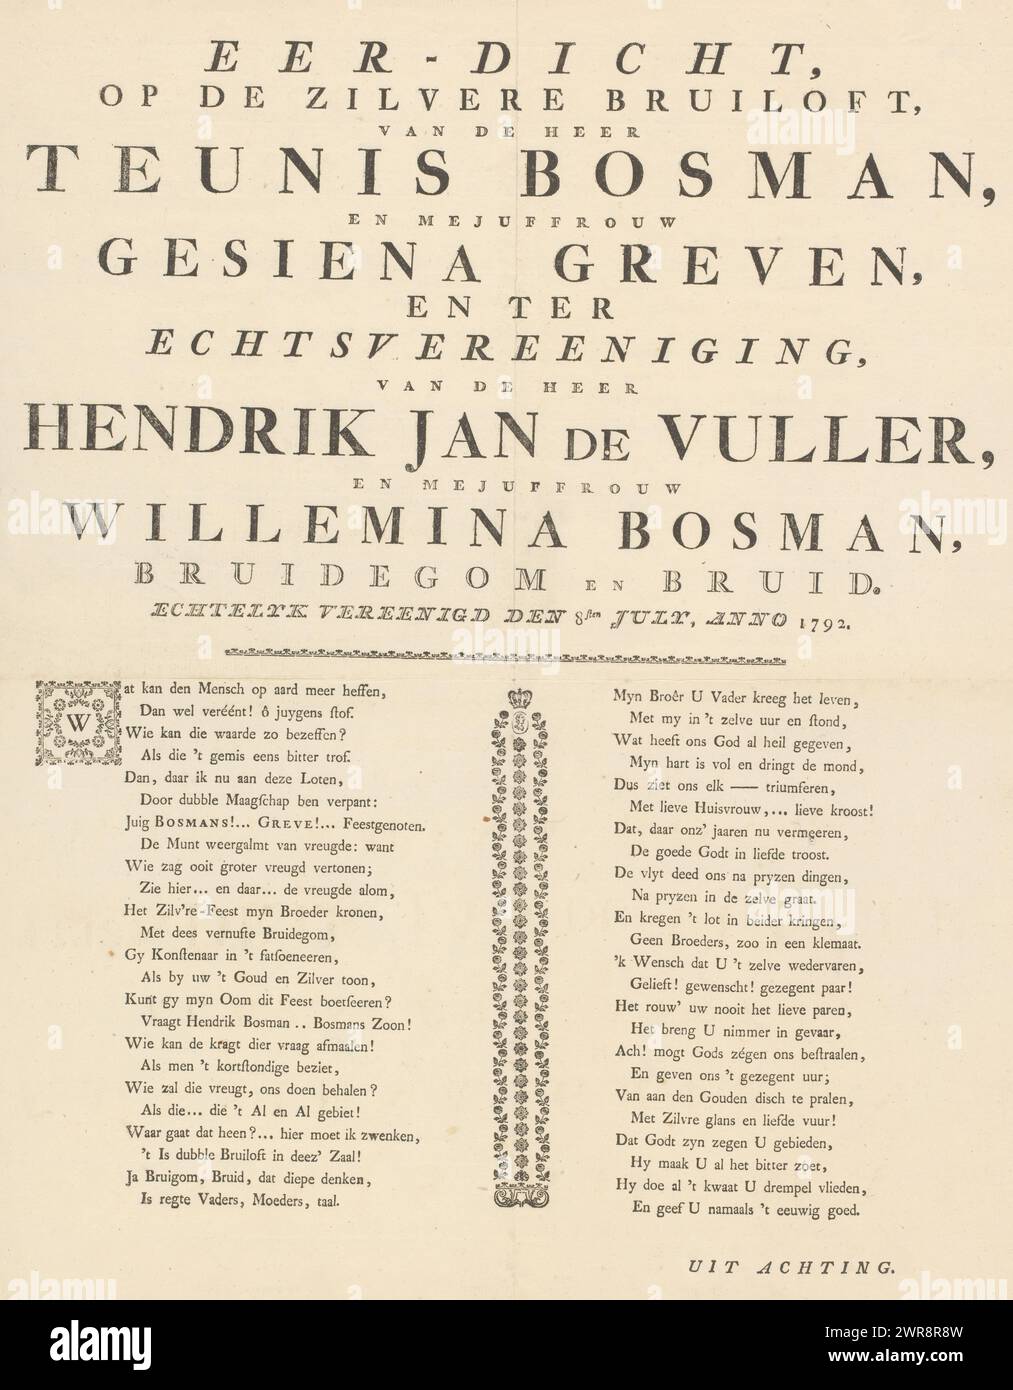 Poem in honor of a silver wedding and a wedding, Honorary Poem, on the silver wedding, by Mr. Teunis Bosman, and Miss Gesiena Greven, and in marriage, by Mr. Hendrik Jan de Vuller and Miss Willemina Bosman (... ) (title on object), anonymous, 1792, paper, letterpress printing, height 502 mm × width 402 mm, text sheet Stock Photo